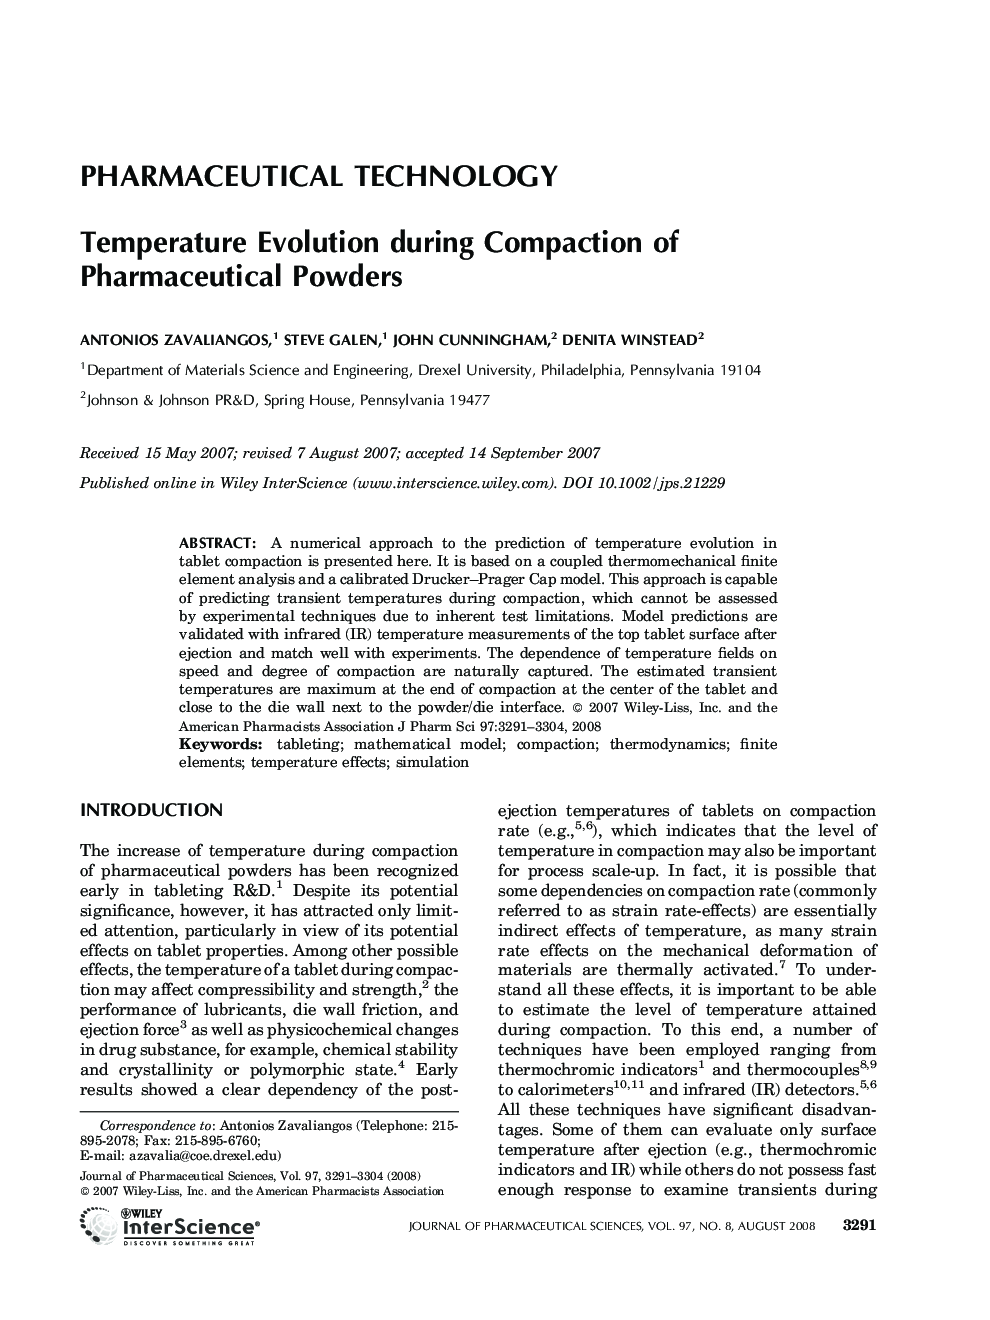 Temperature Evolution during Compaction of Pharmaceutical Powders